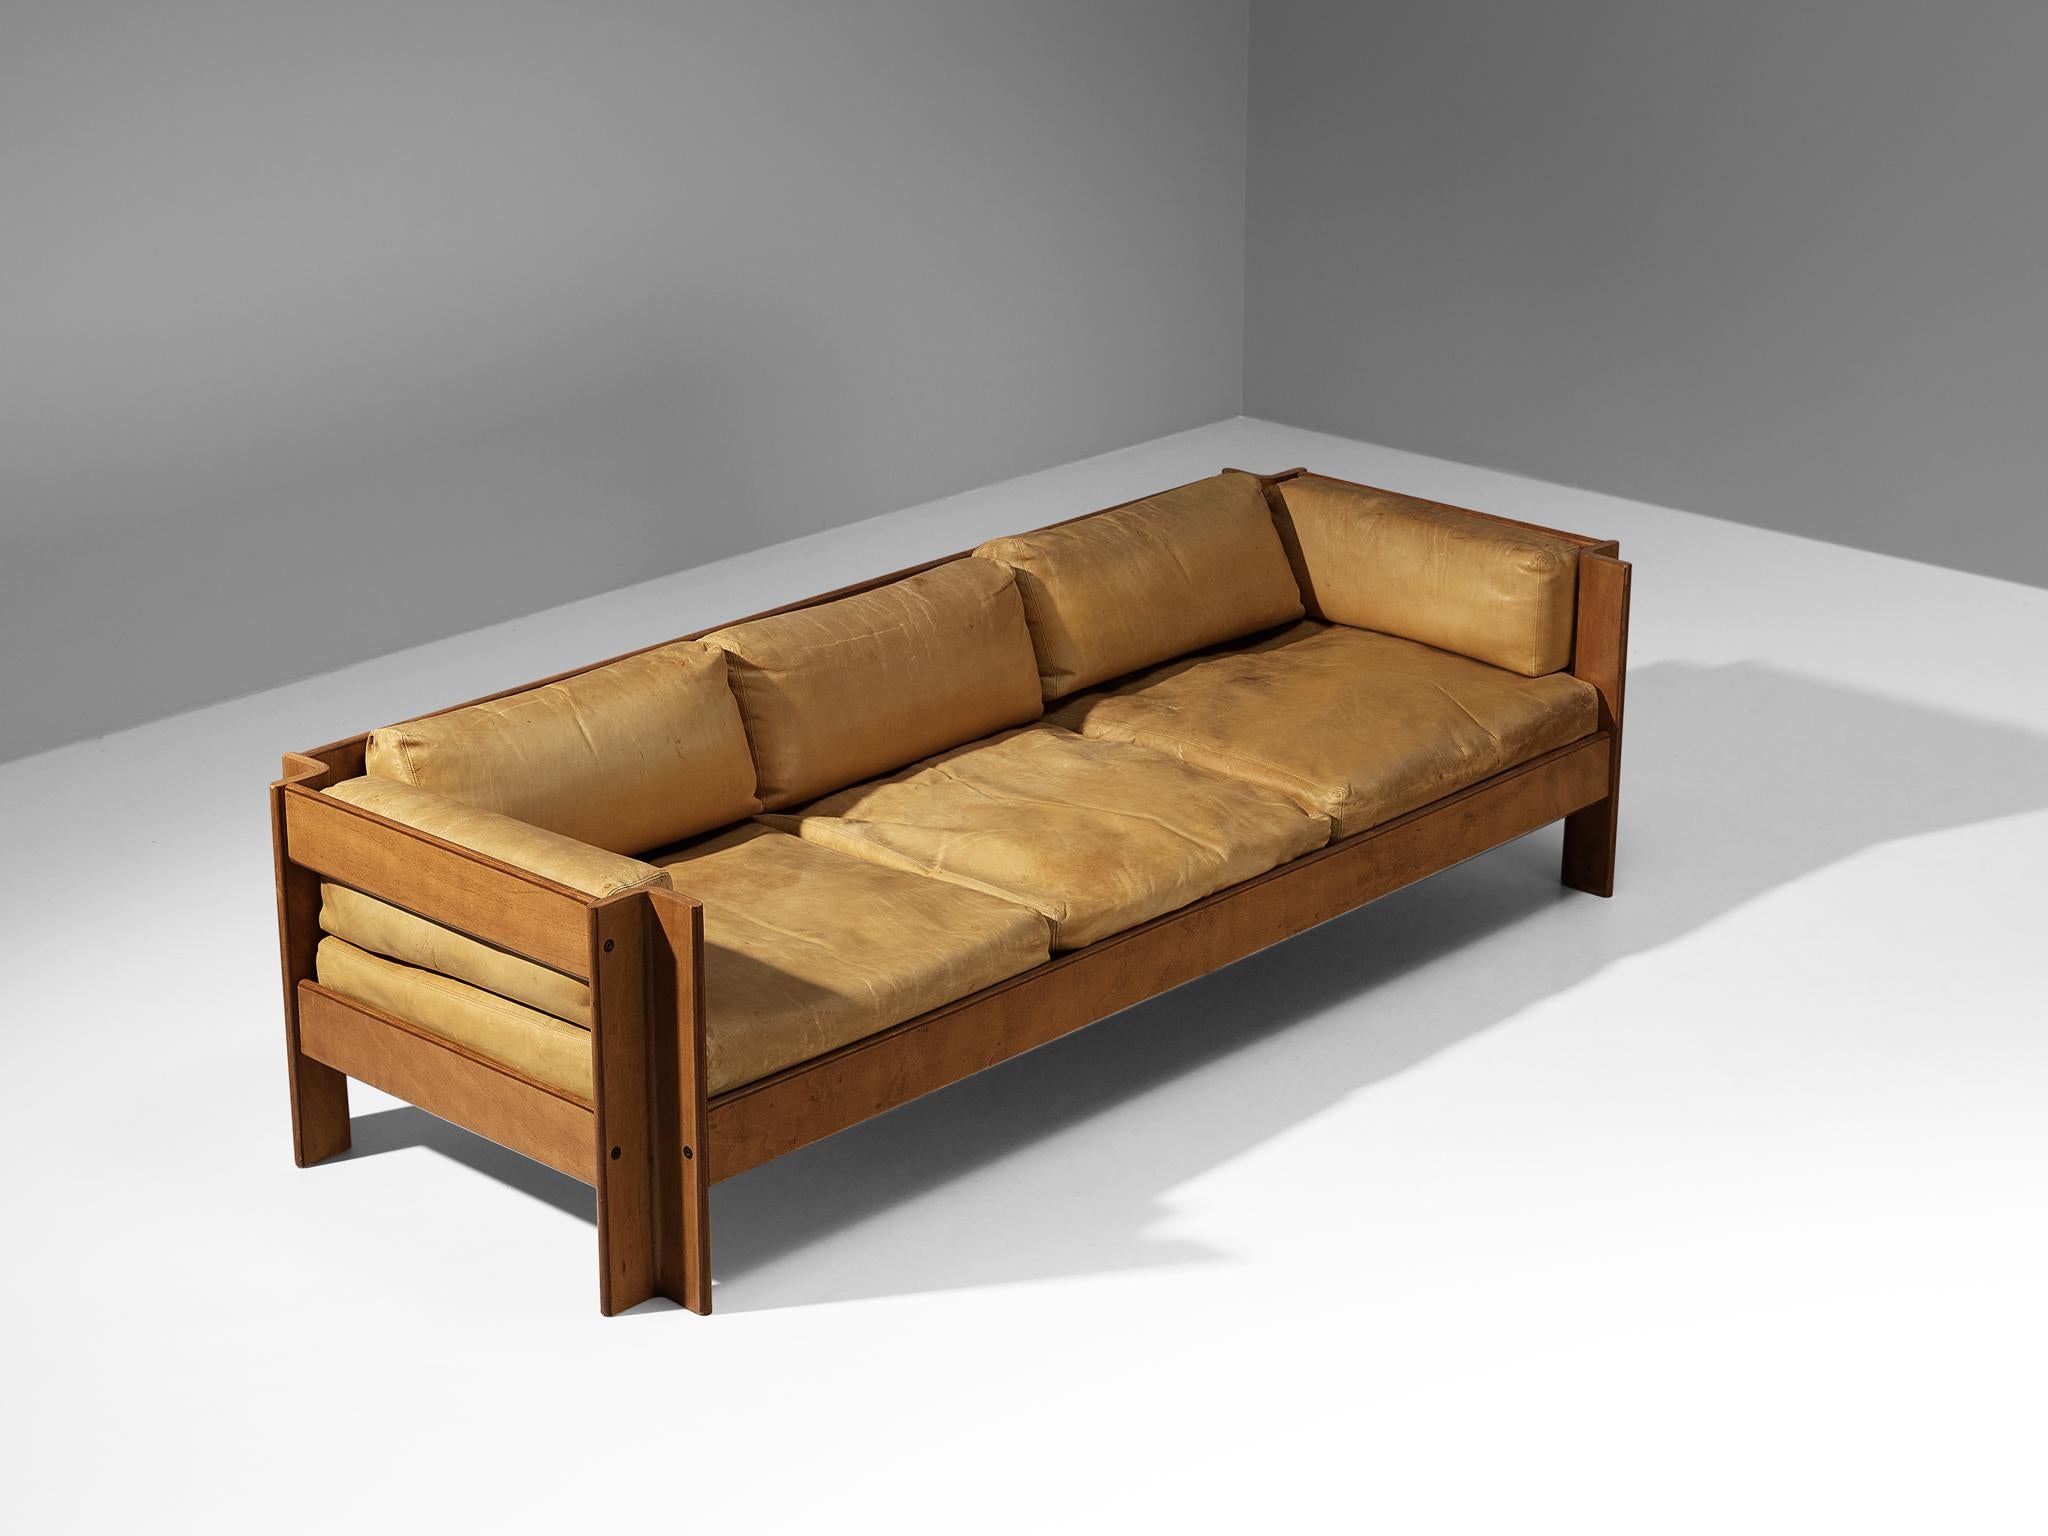 Sergio Asti for Poltronova, sofa model 'Zelda', leather, walnut, brass, Italy, 1962. 

This well-executed sofa features a sculptural wooden frame composed of cut-out angles that contribute to the sofa's architectural appearance. The design has an